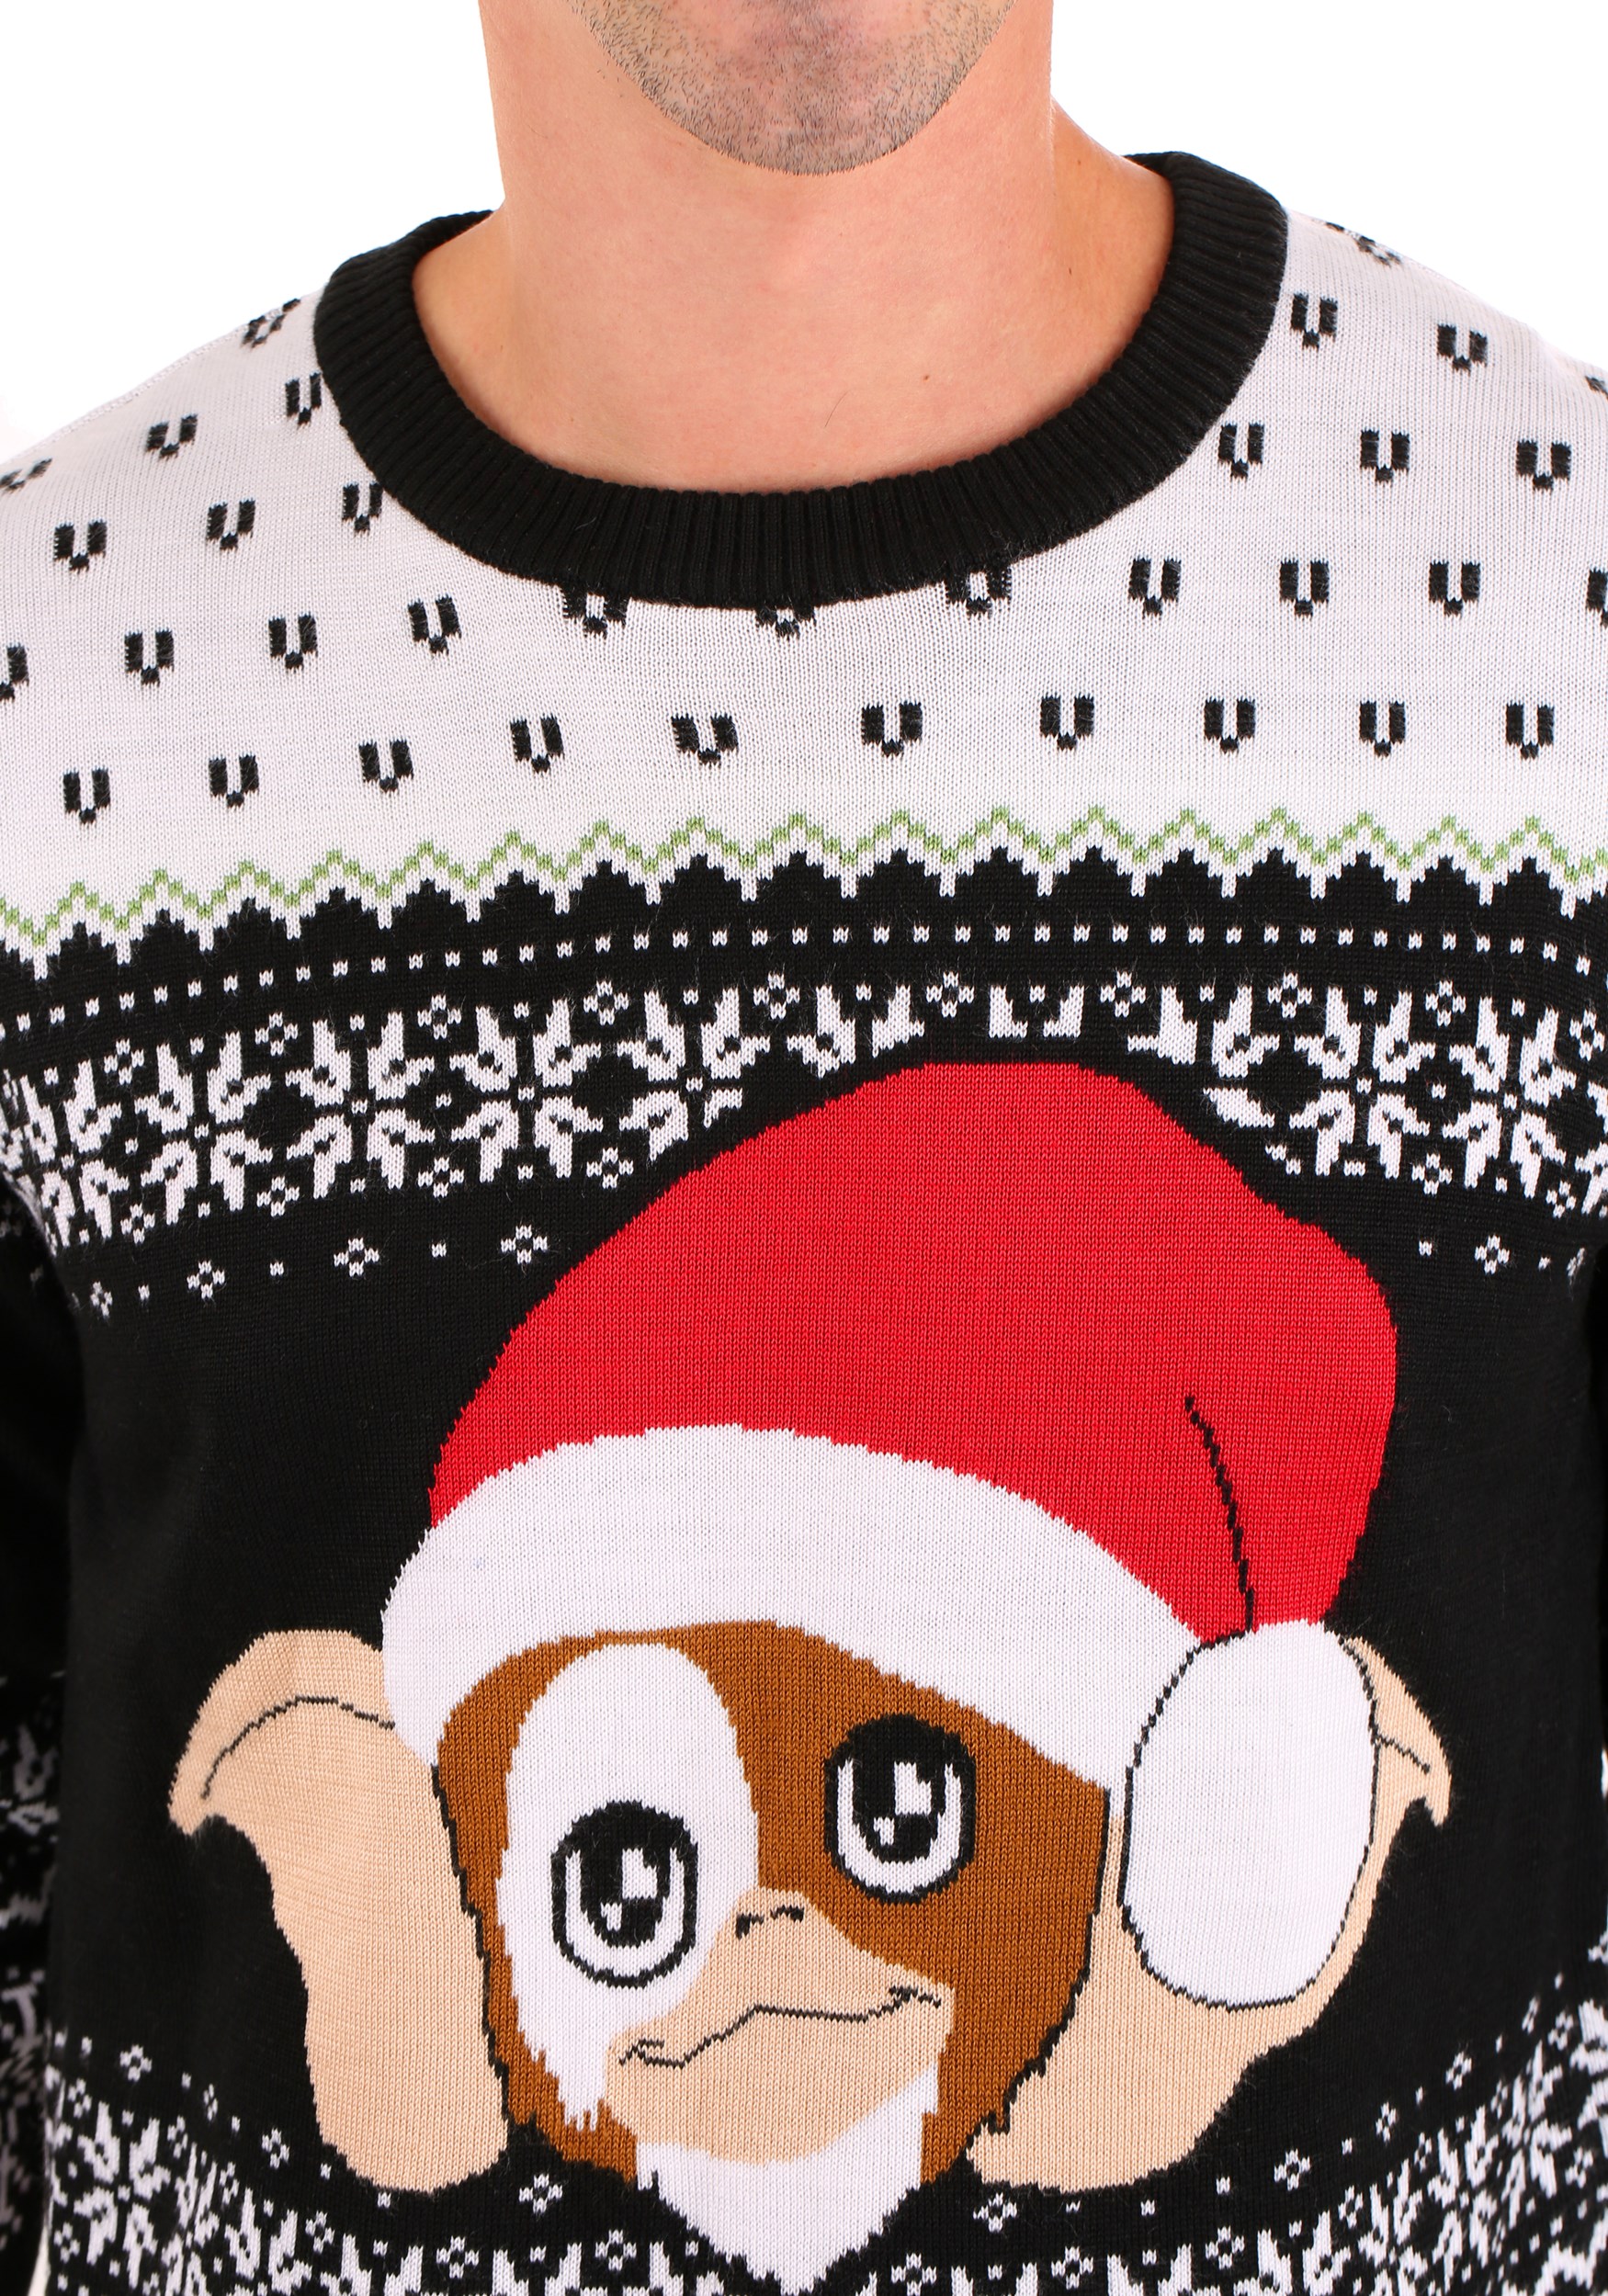 Gremlins Gizmo Claus Ugly Christmas Sweater For Adults